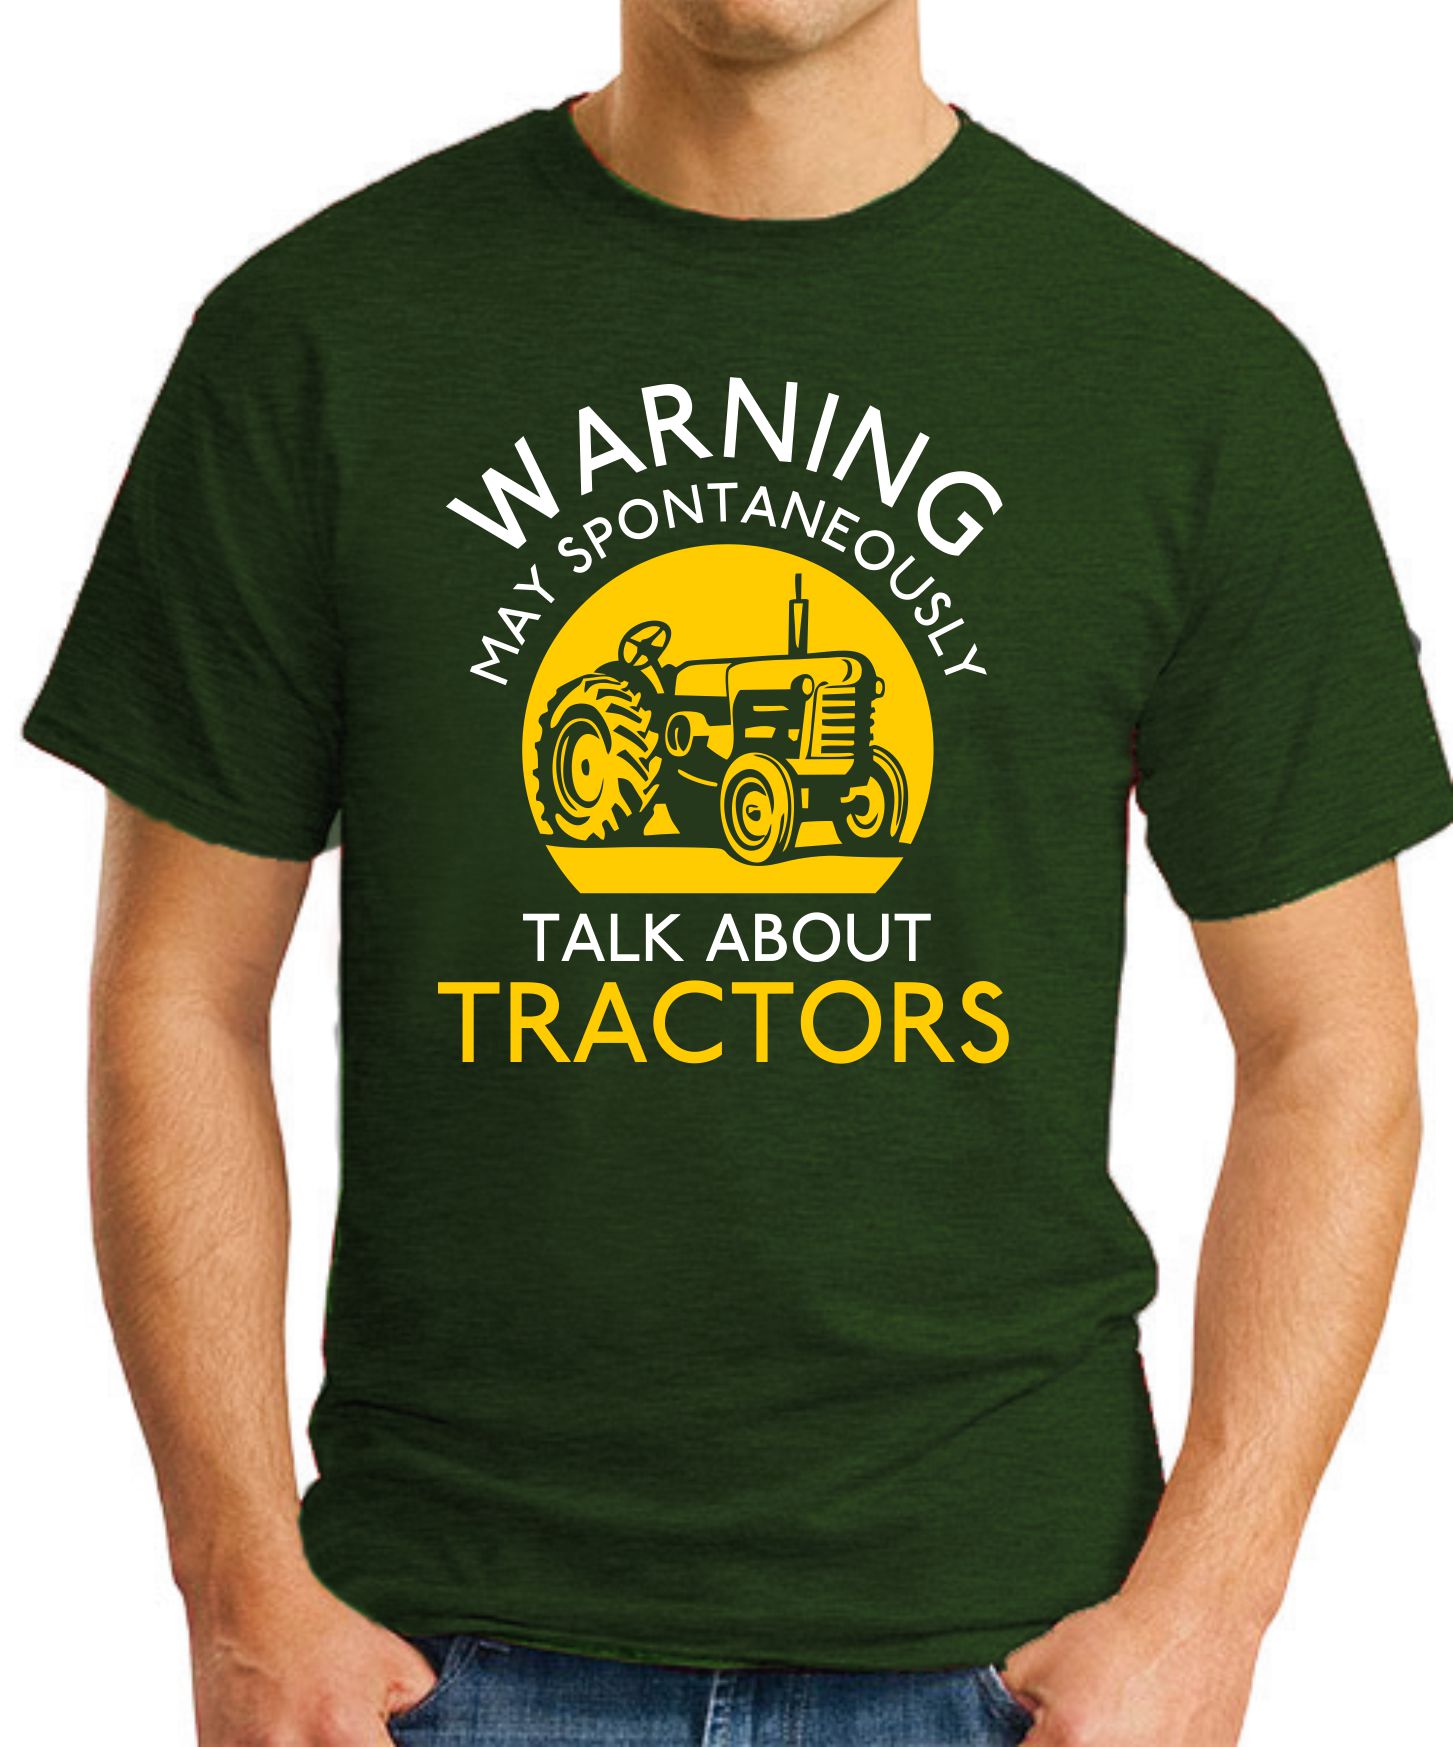 WARNING MAY SPONTANEOUSLY TALK ABOUT TRACTORS forest green